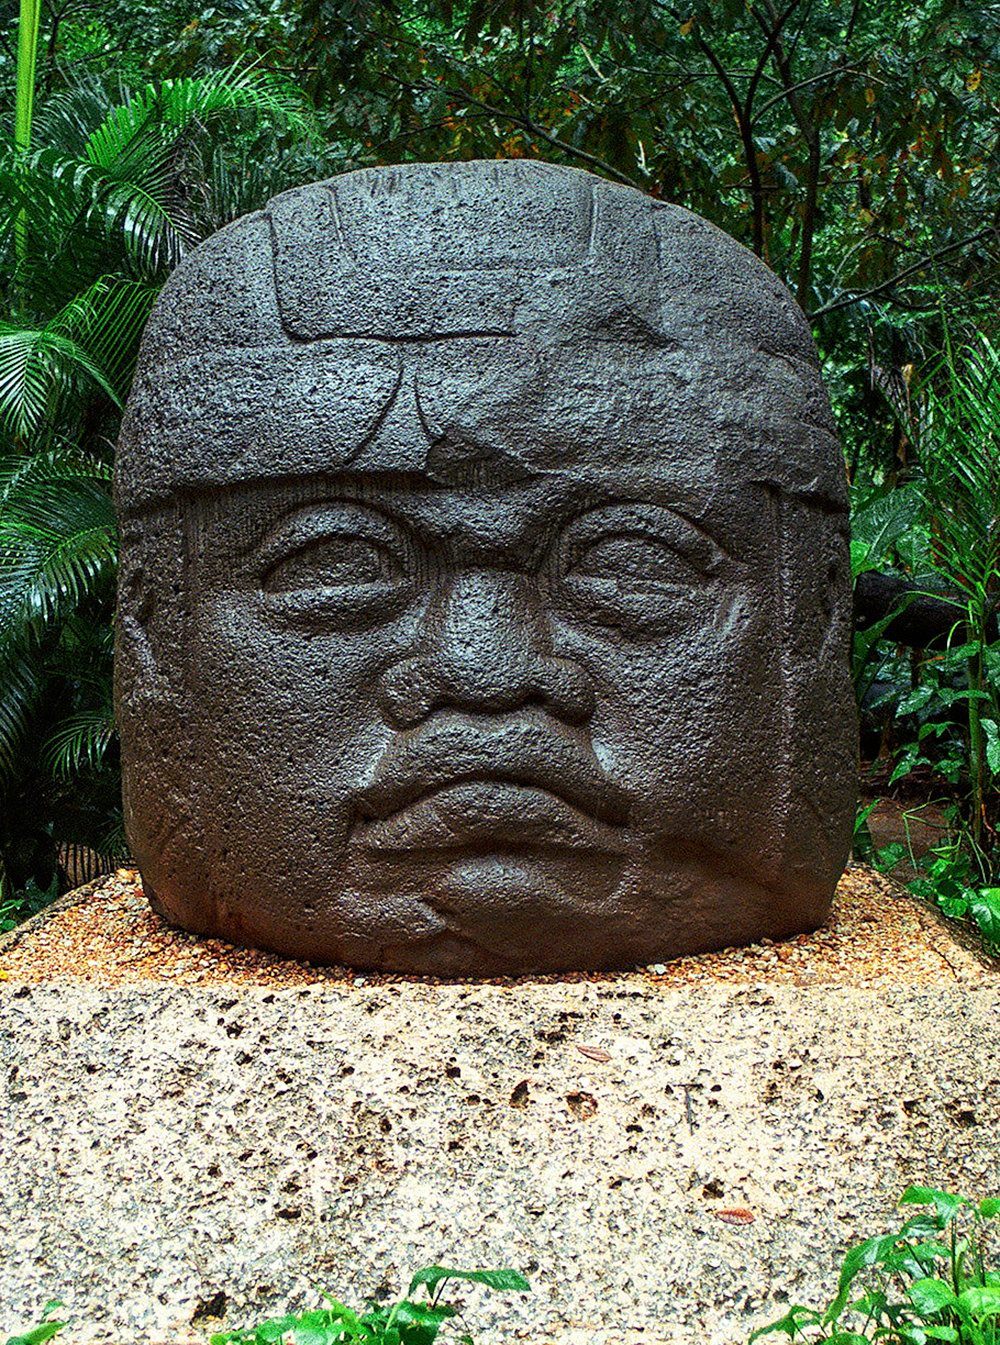 A photo of a Giant Olmec Head from 700-850 BC, standing 2.5m tall in a garden setting.